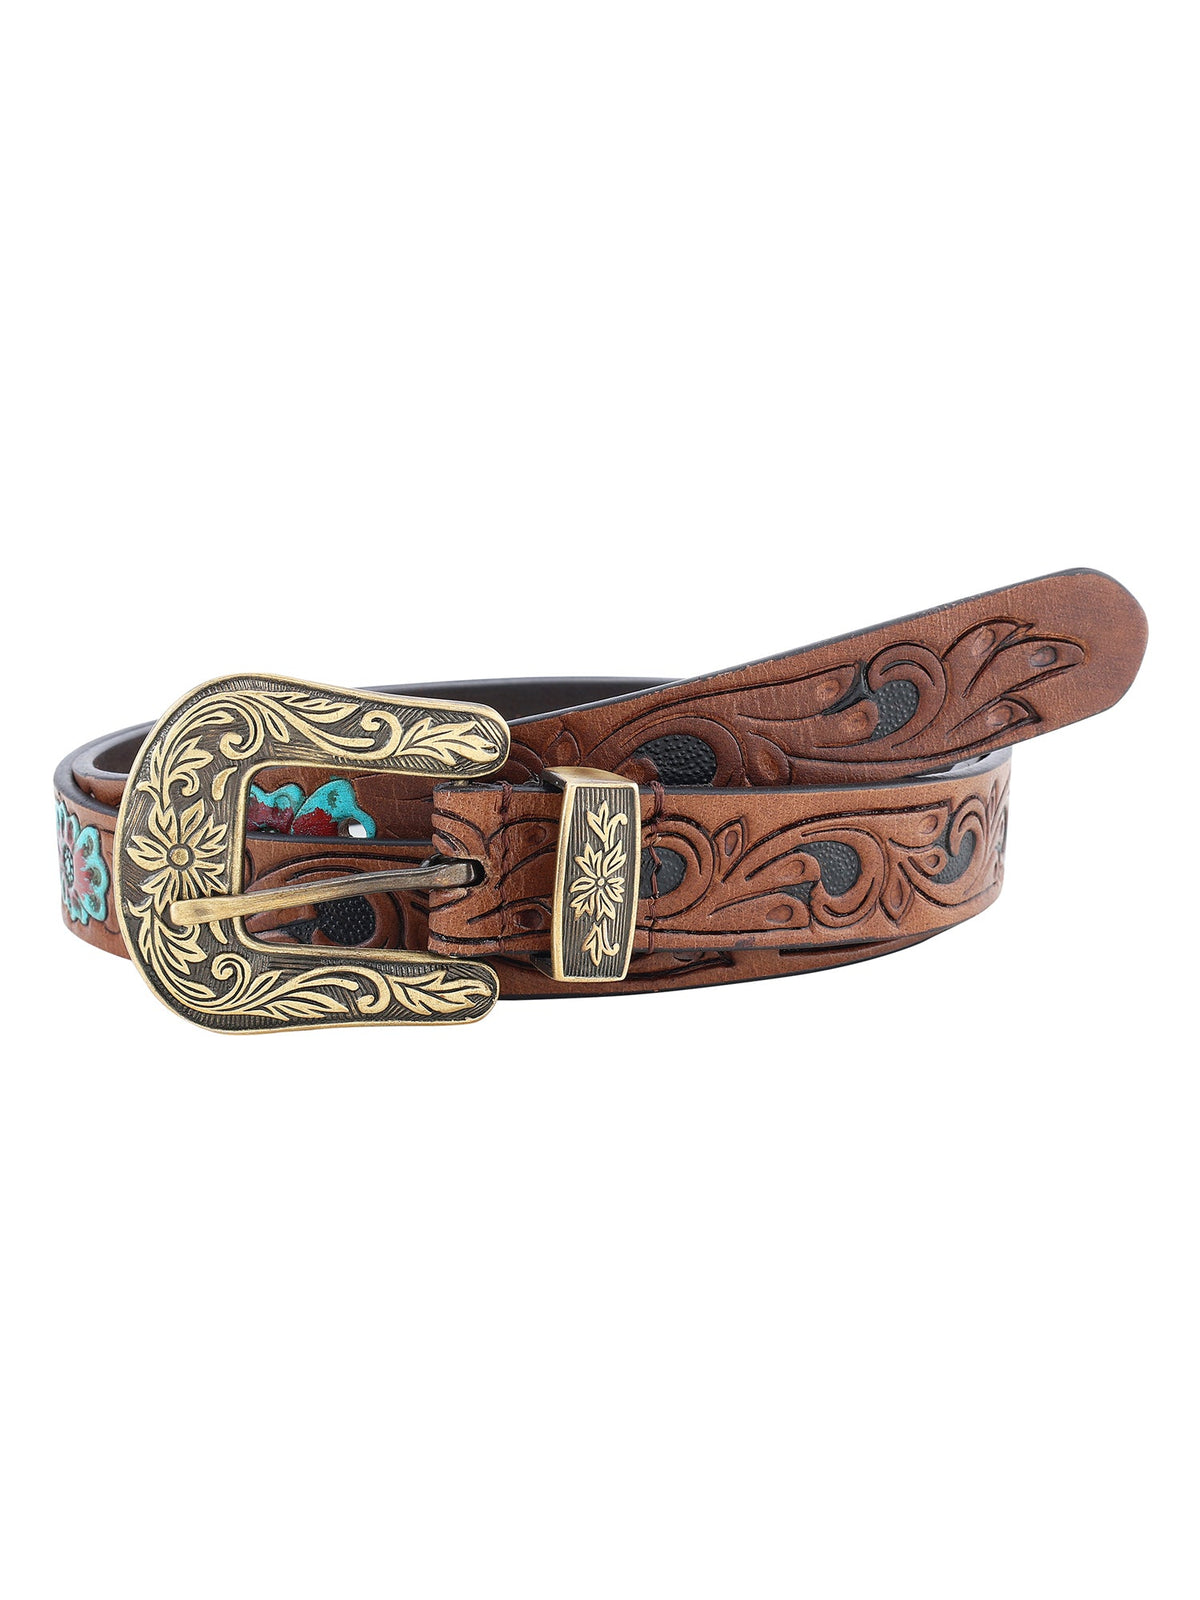 Tan genuine leather hand crafted women's belt